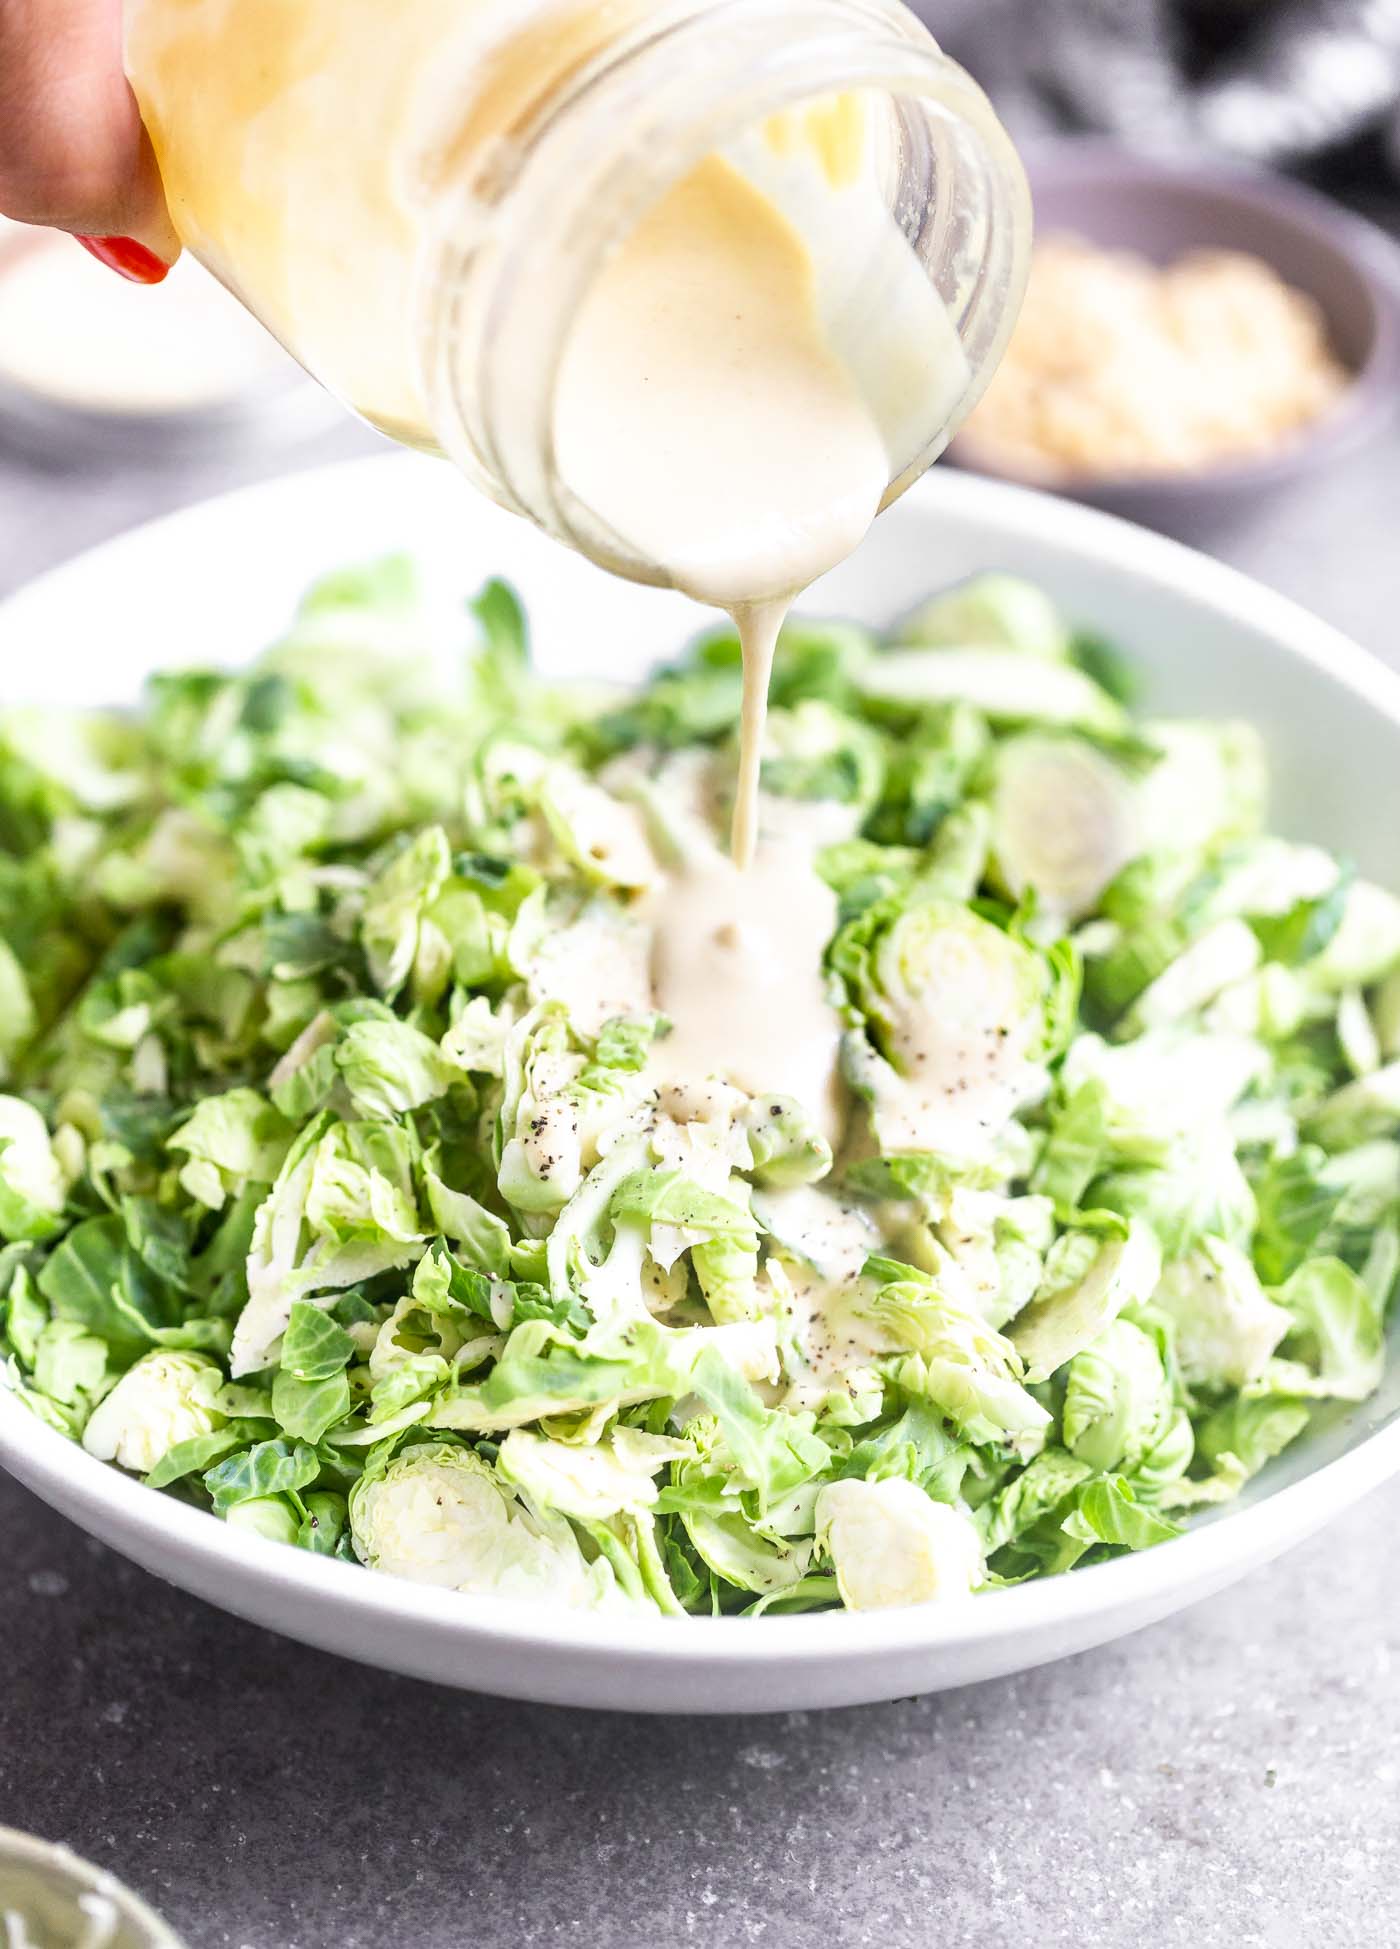 This 5-Ingredient Tahini Maple Dressing is our very favorite healthy salad dressing that goes with EVERYTHING. It's nutty, sweet, acidic, and the perfect balance of flavors. Make a big batch in a mason jar and store in the fridge for weeks!&nbsp;